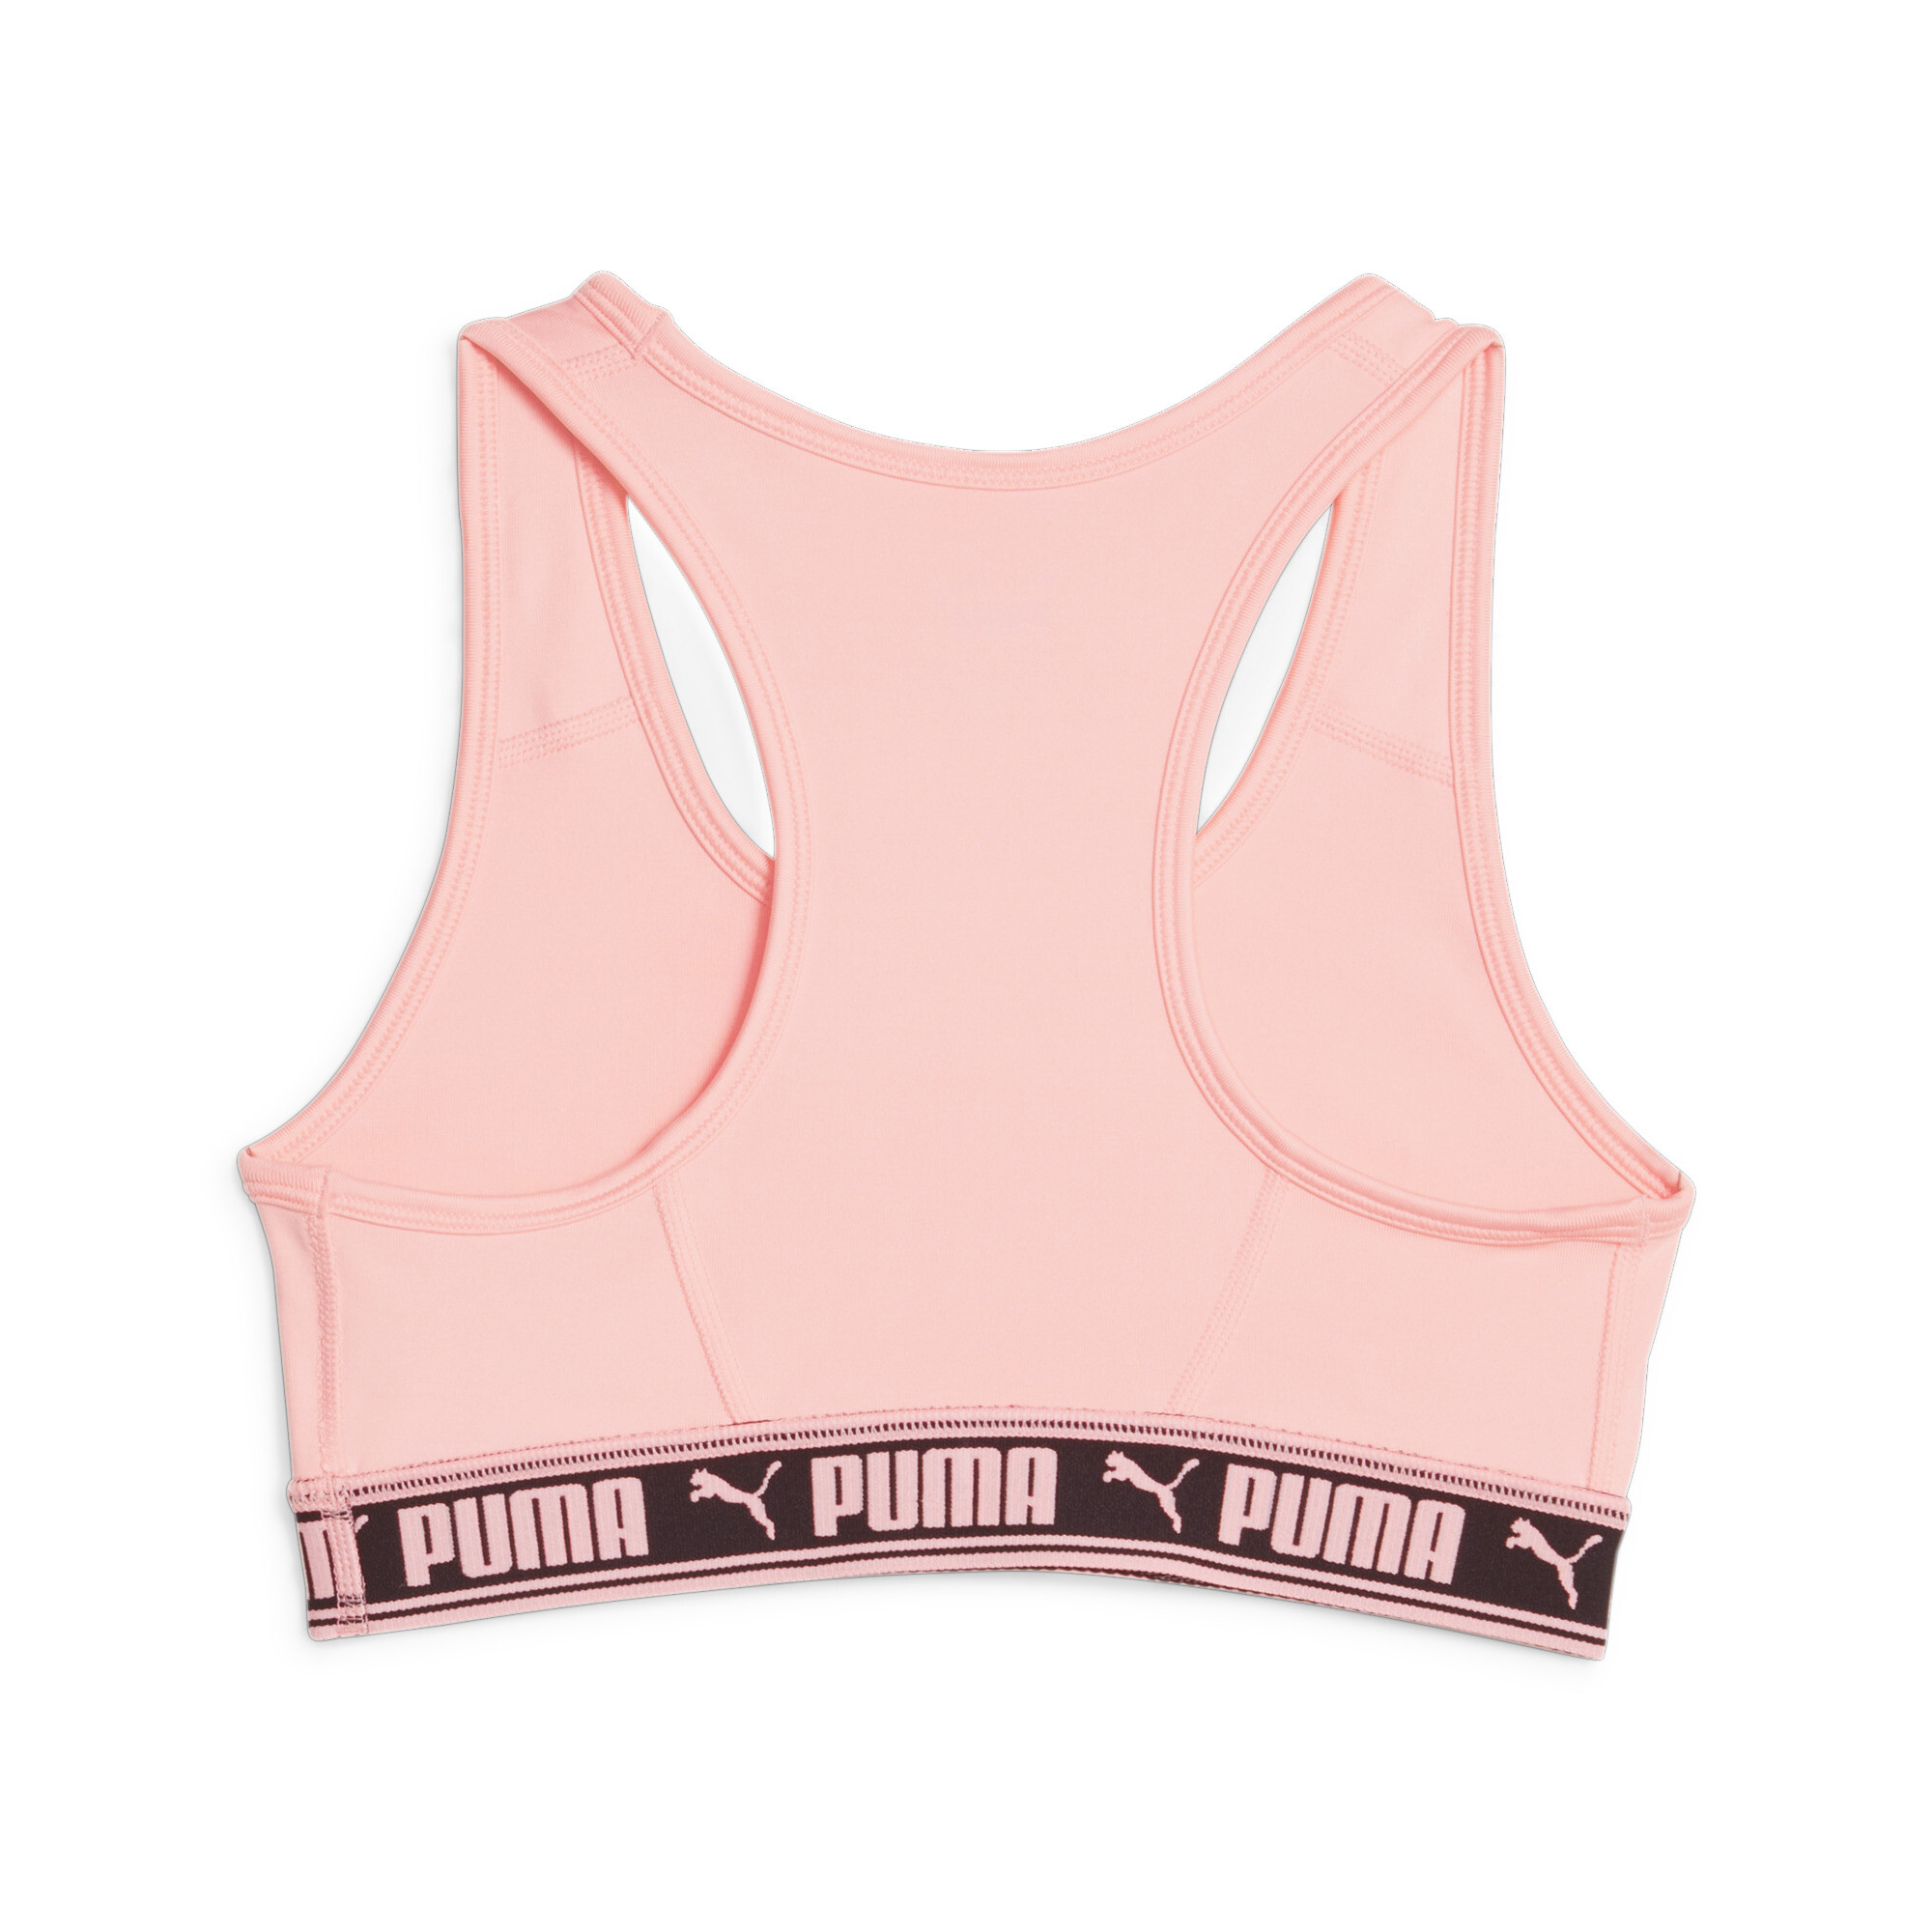 Women's Puma Strong Bra Youth, Pink, Size 15-16Y, Clothing